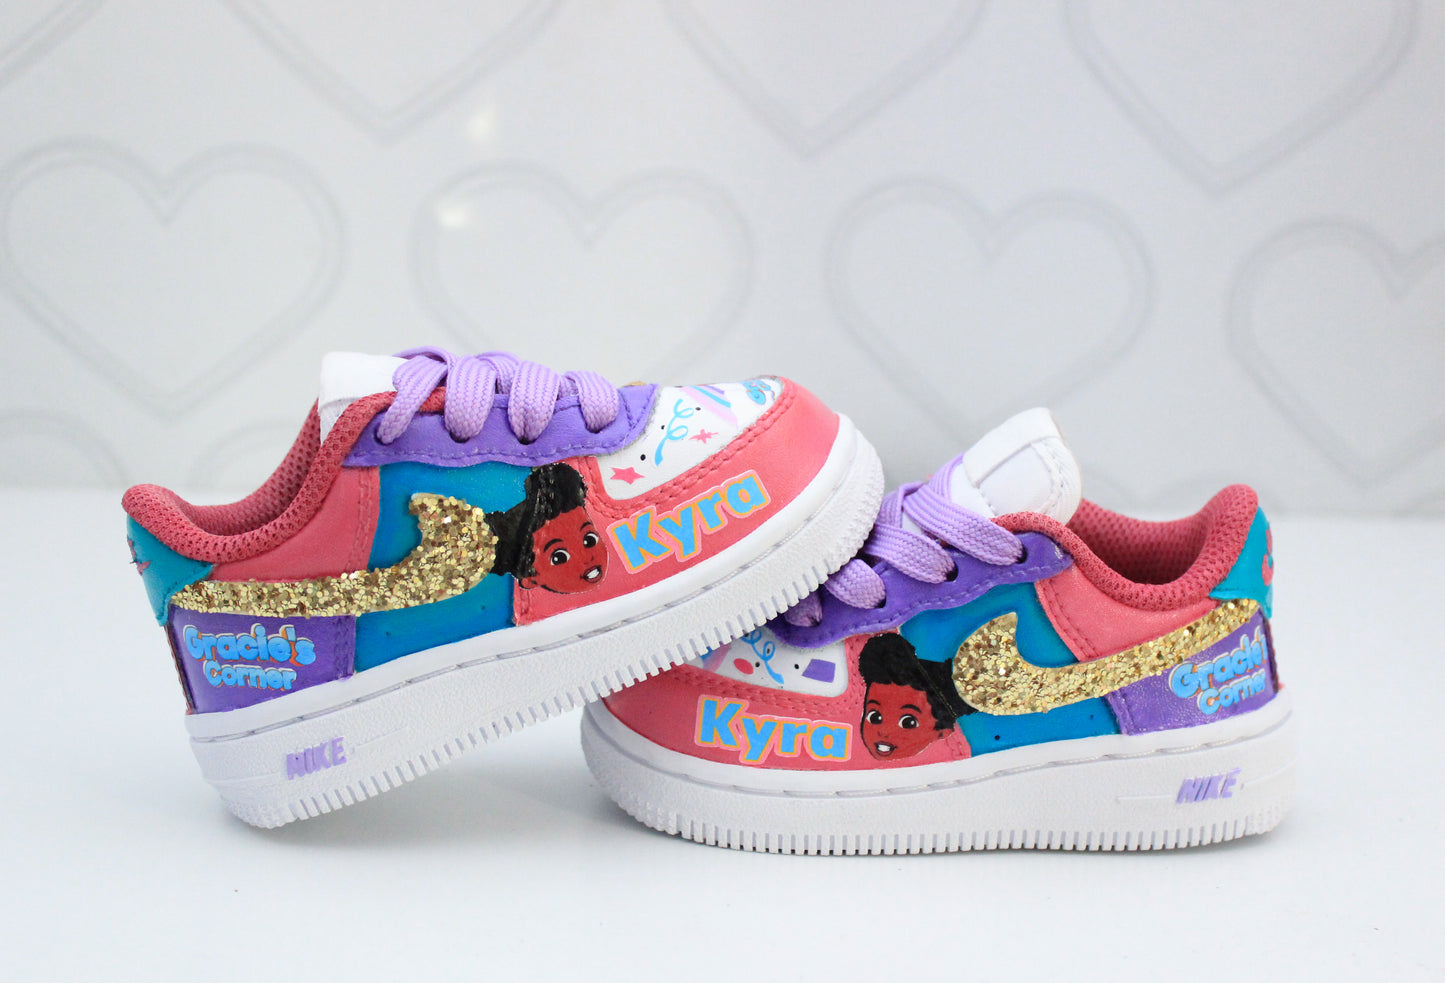 Gracie's Corner shoes-Gracie's Corner air force 1's -Girls af1's Shoes-Custom air force 1's- Toddler air force 1's